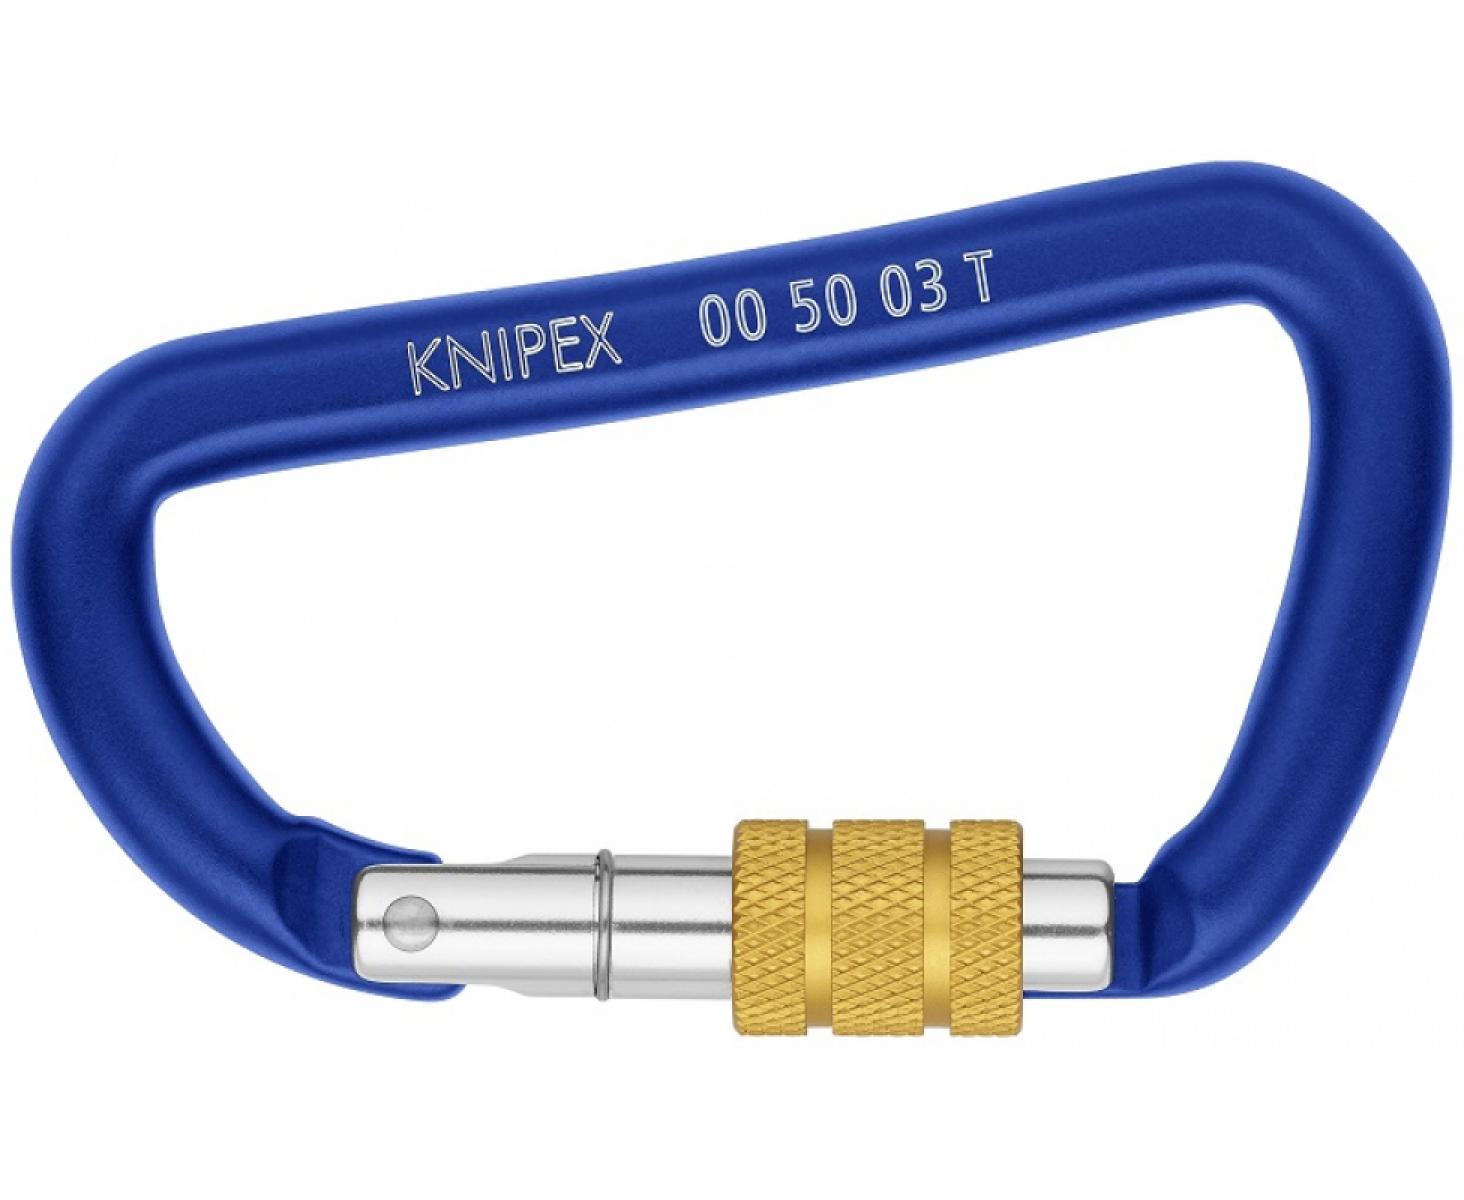 Карабины Knipex KN-005003TBK 2 шт.